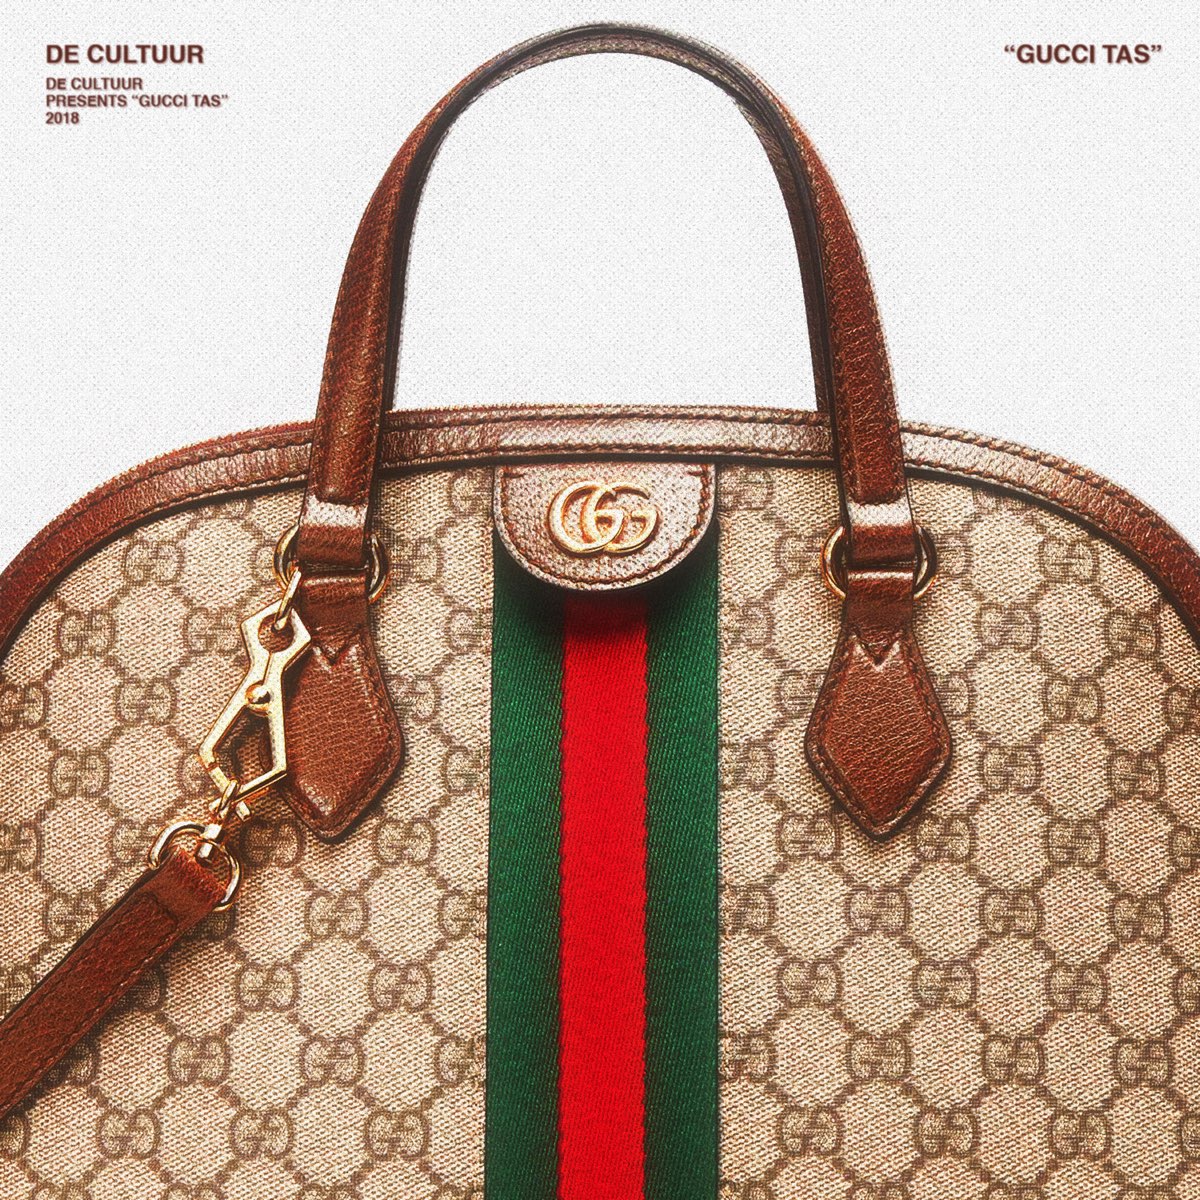 Individualiteit Taille Grens Gucci Tas - Single by De Cultuur on Apple Music